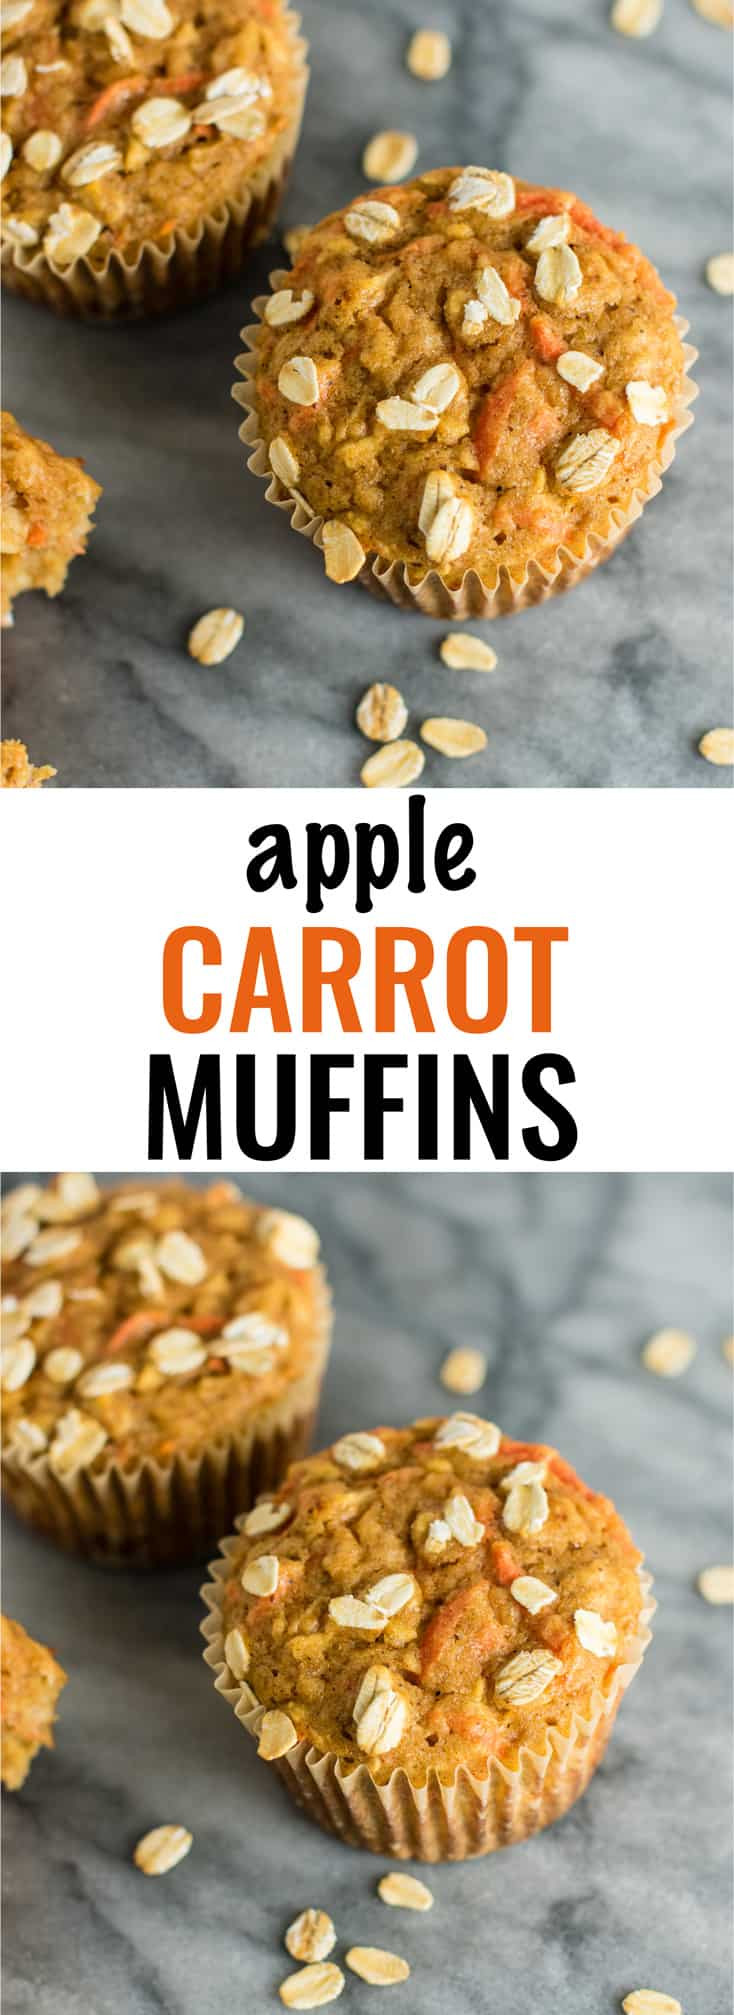 Carrot Applesauce Muffins
 Wholesome Carrot Apple Muffins Recipe with pure maple syrup